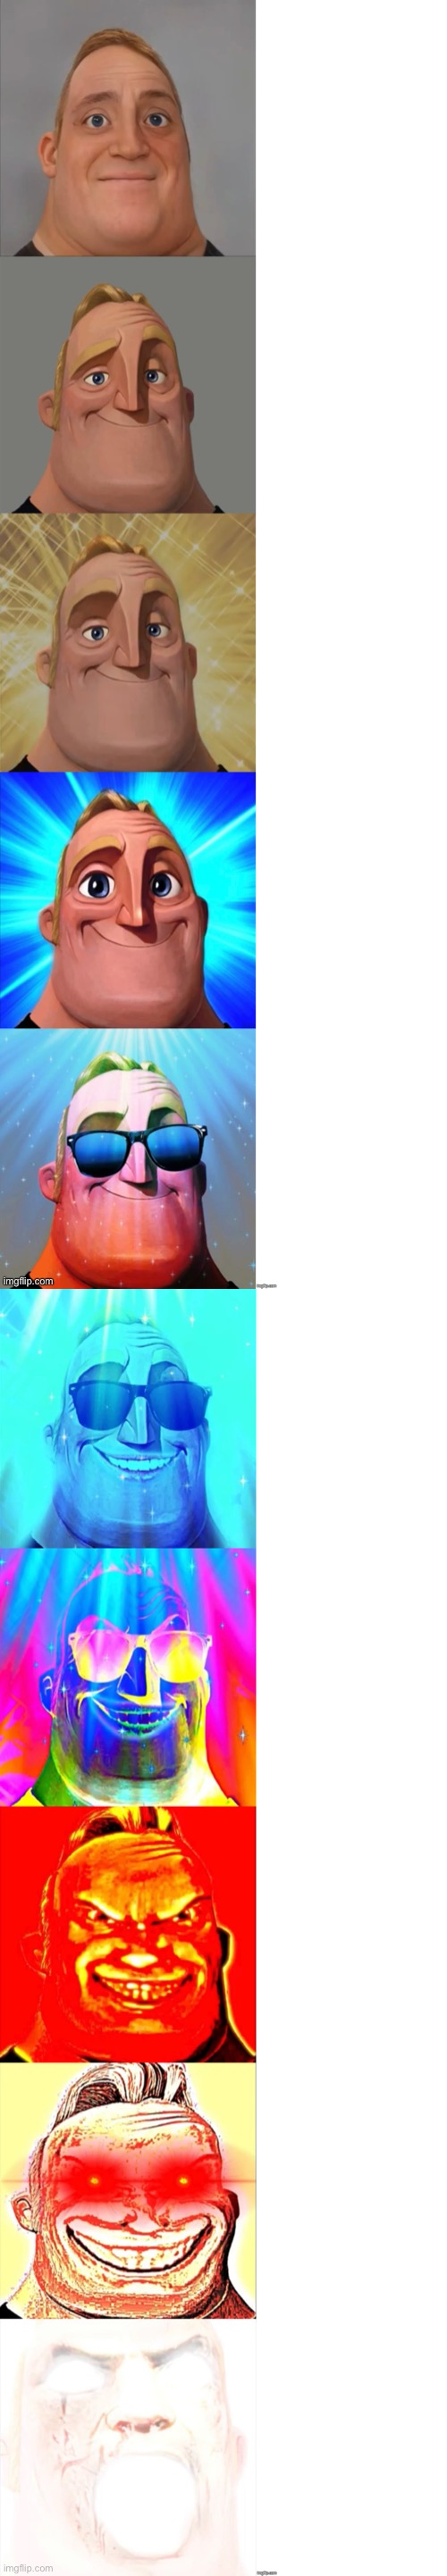 Mr Incredible Becoming Canny Blank Meme Template